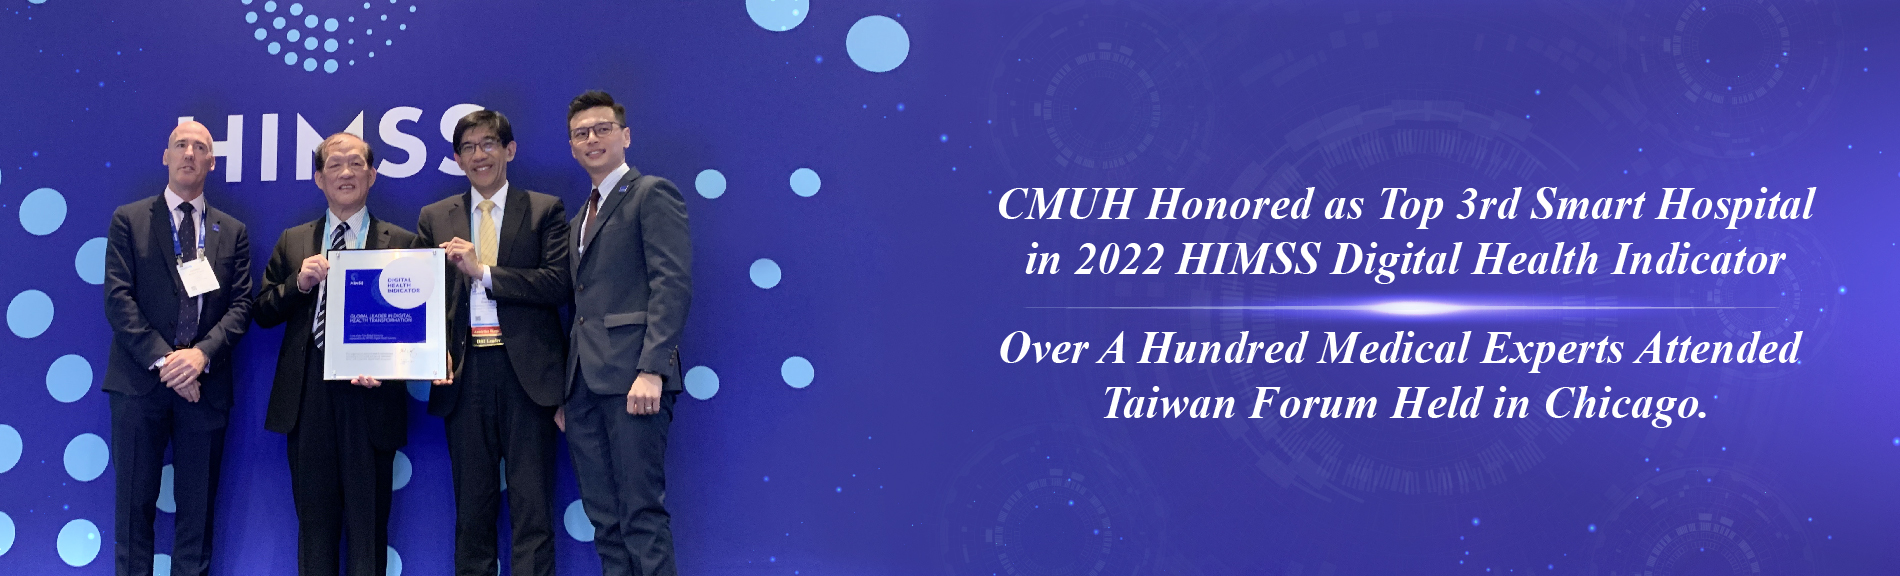 CMUH Honored as Top 3rd Smart Hospital in 2022 HIMSS Digital Health Indicator. Over A Hundred Medical Experts Attended Taiwan Forum Held in Chicago.